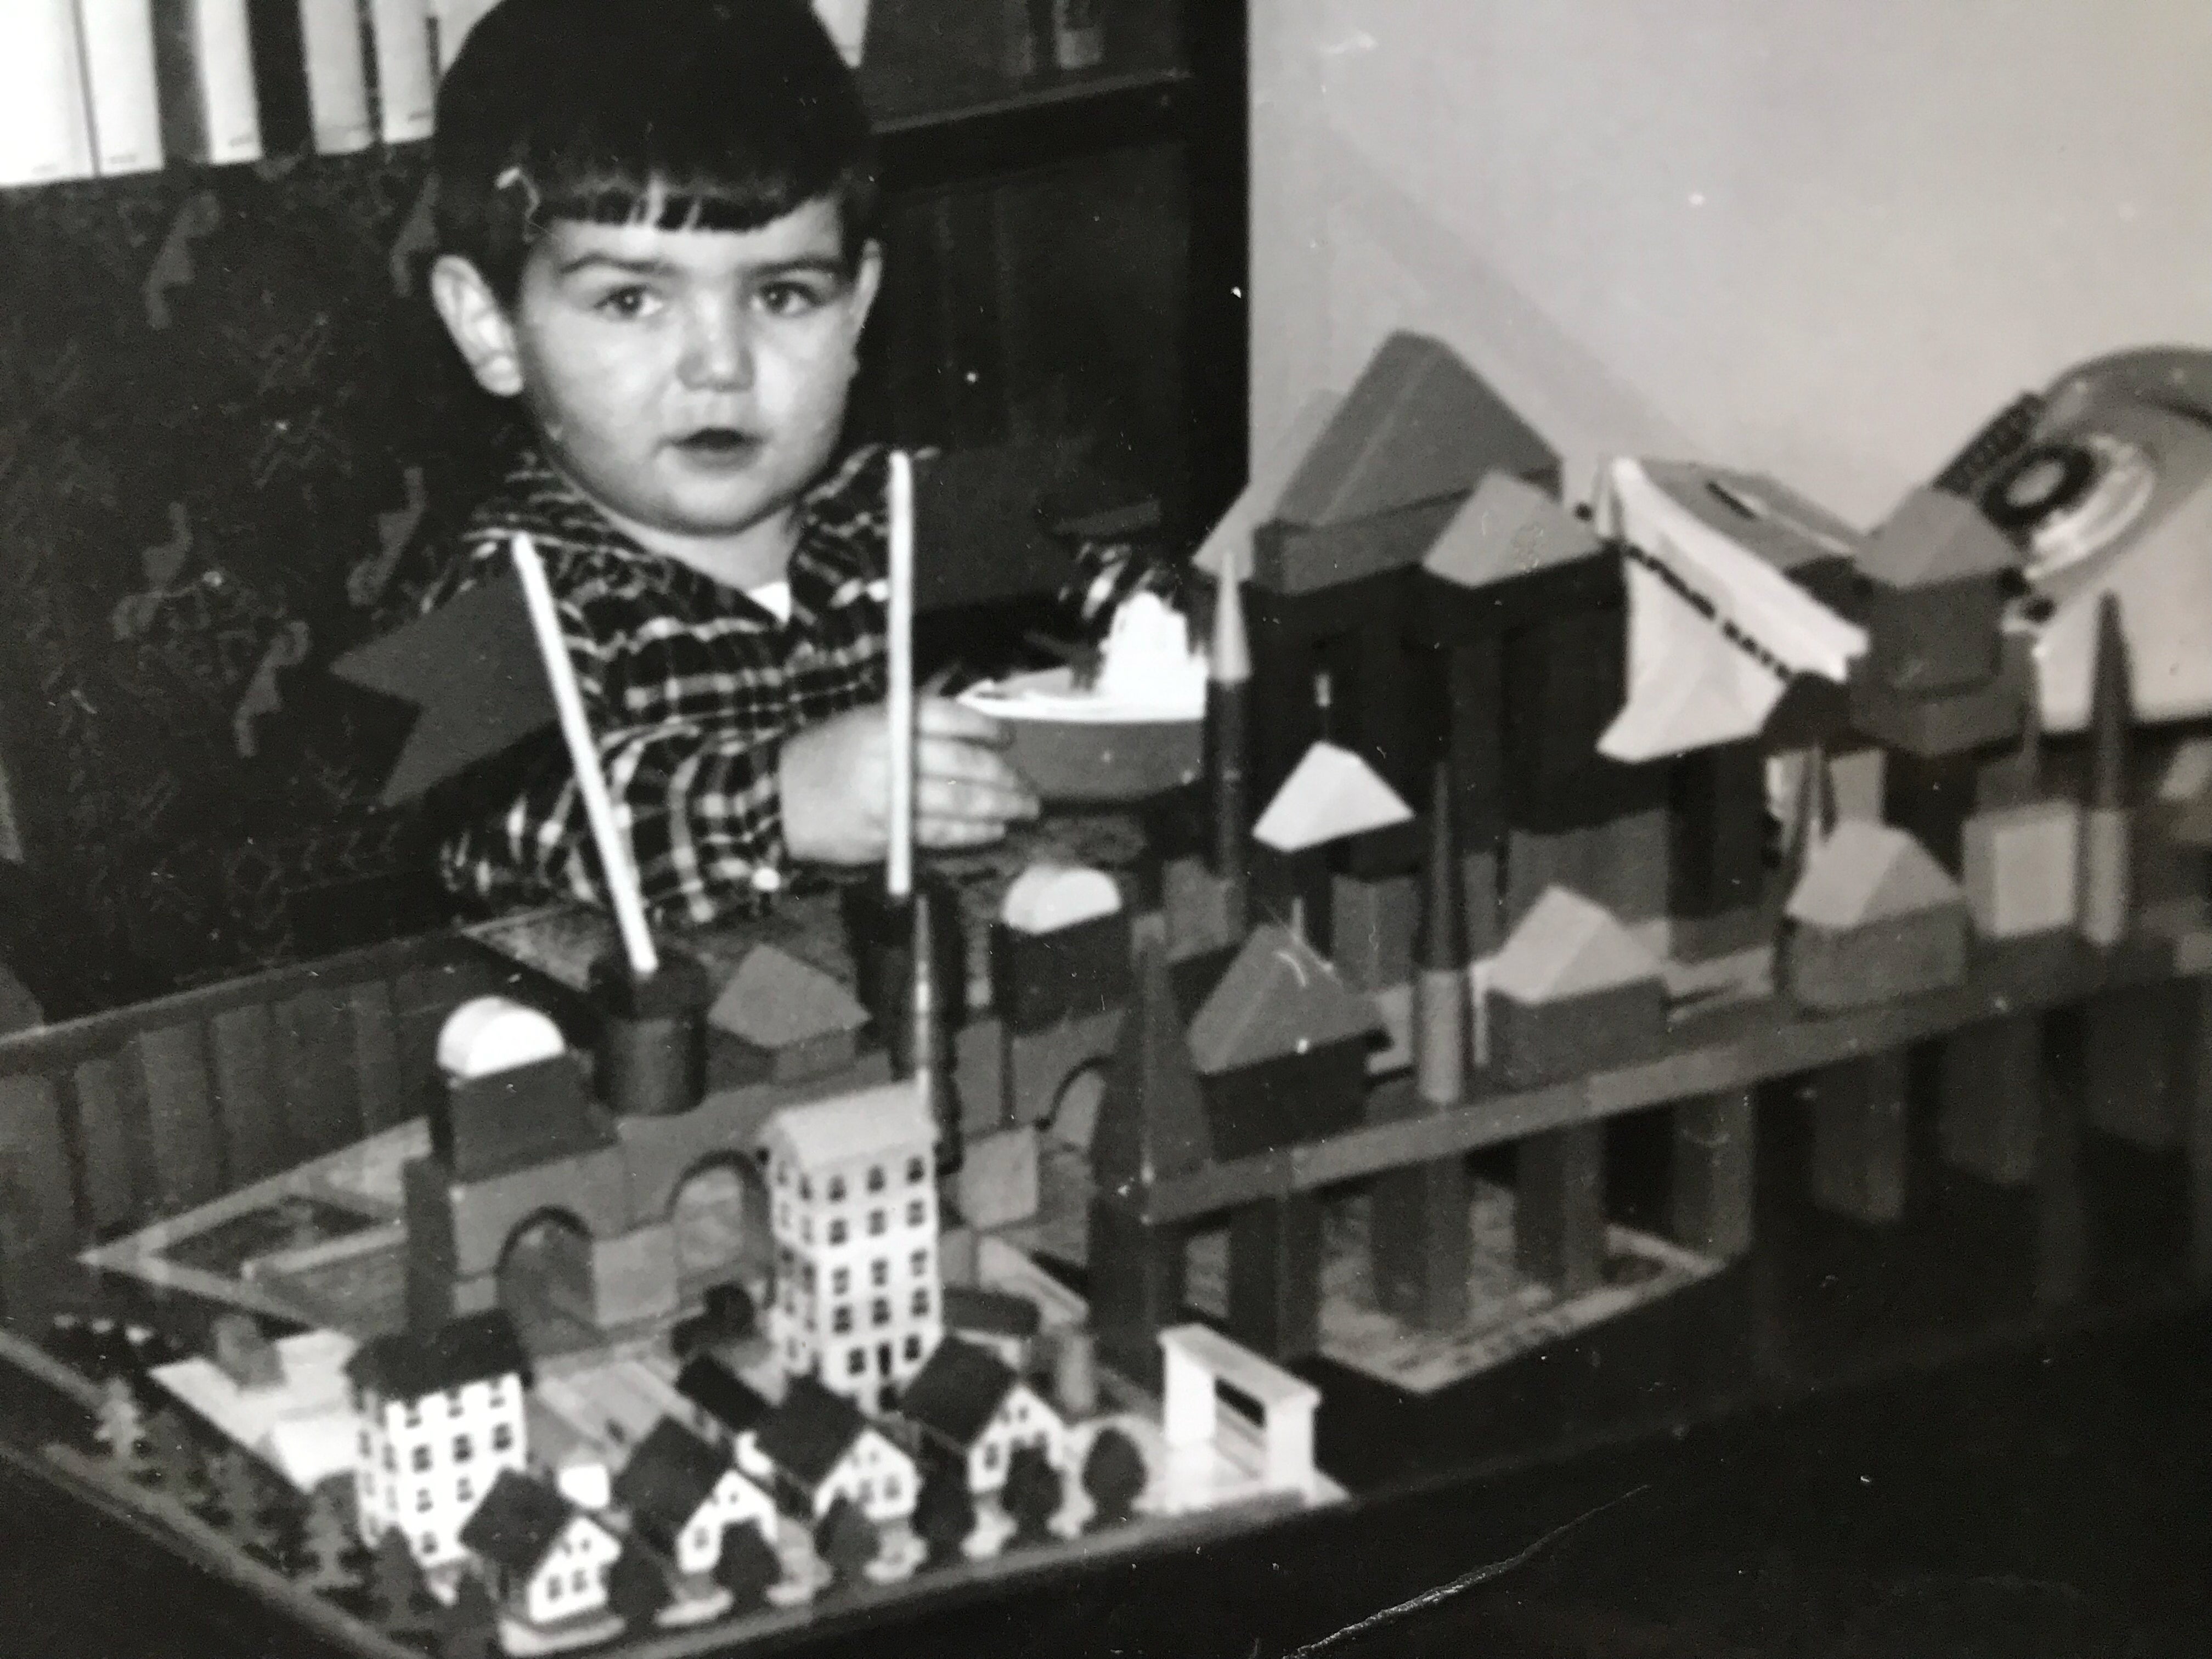 Gene Avakyan with a construction set before going to the US